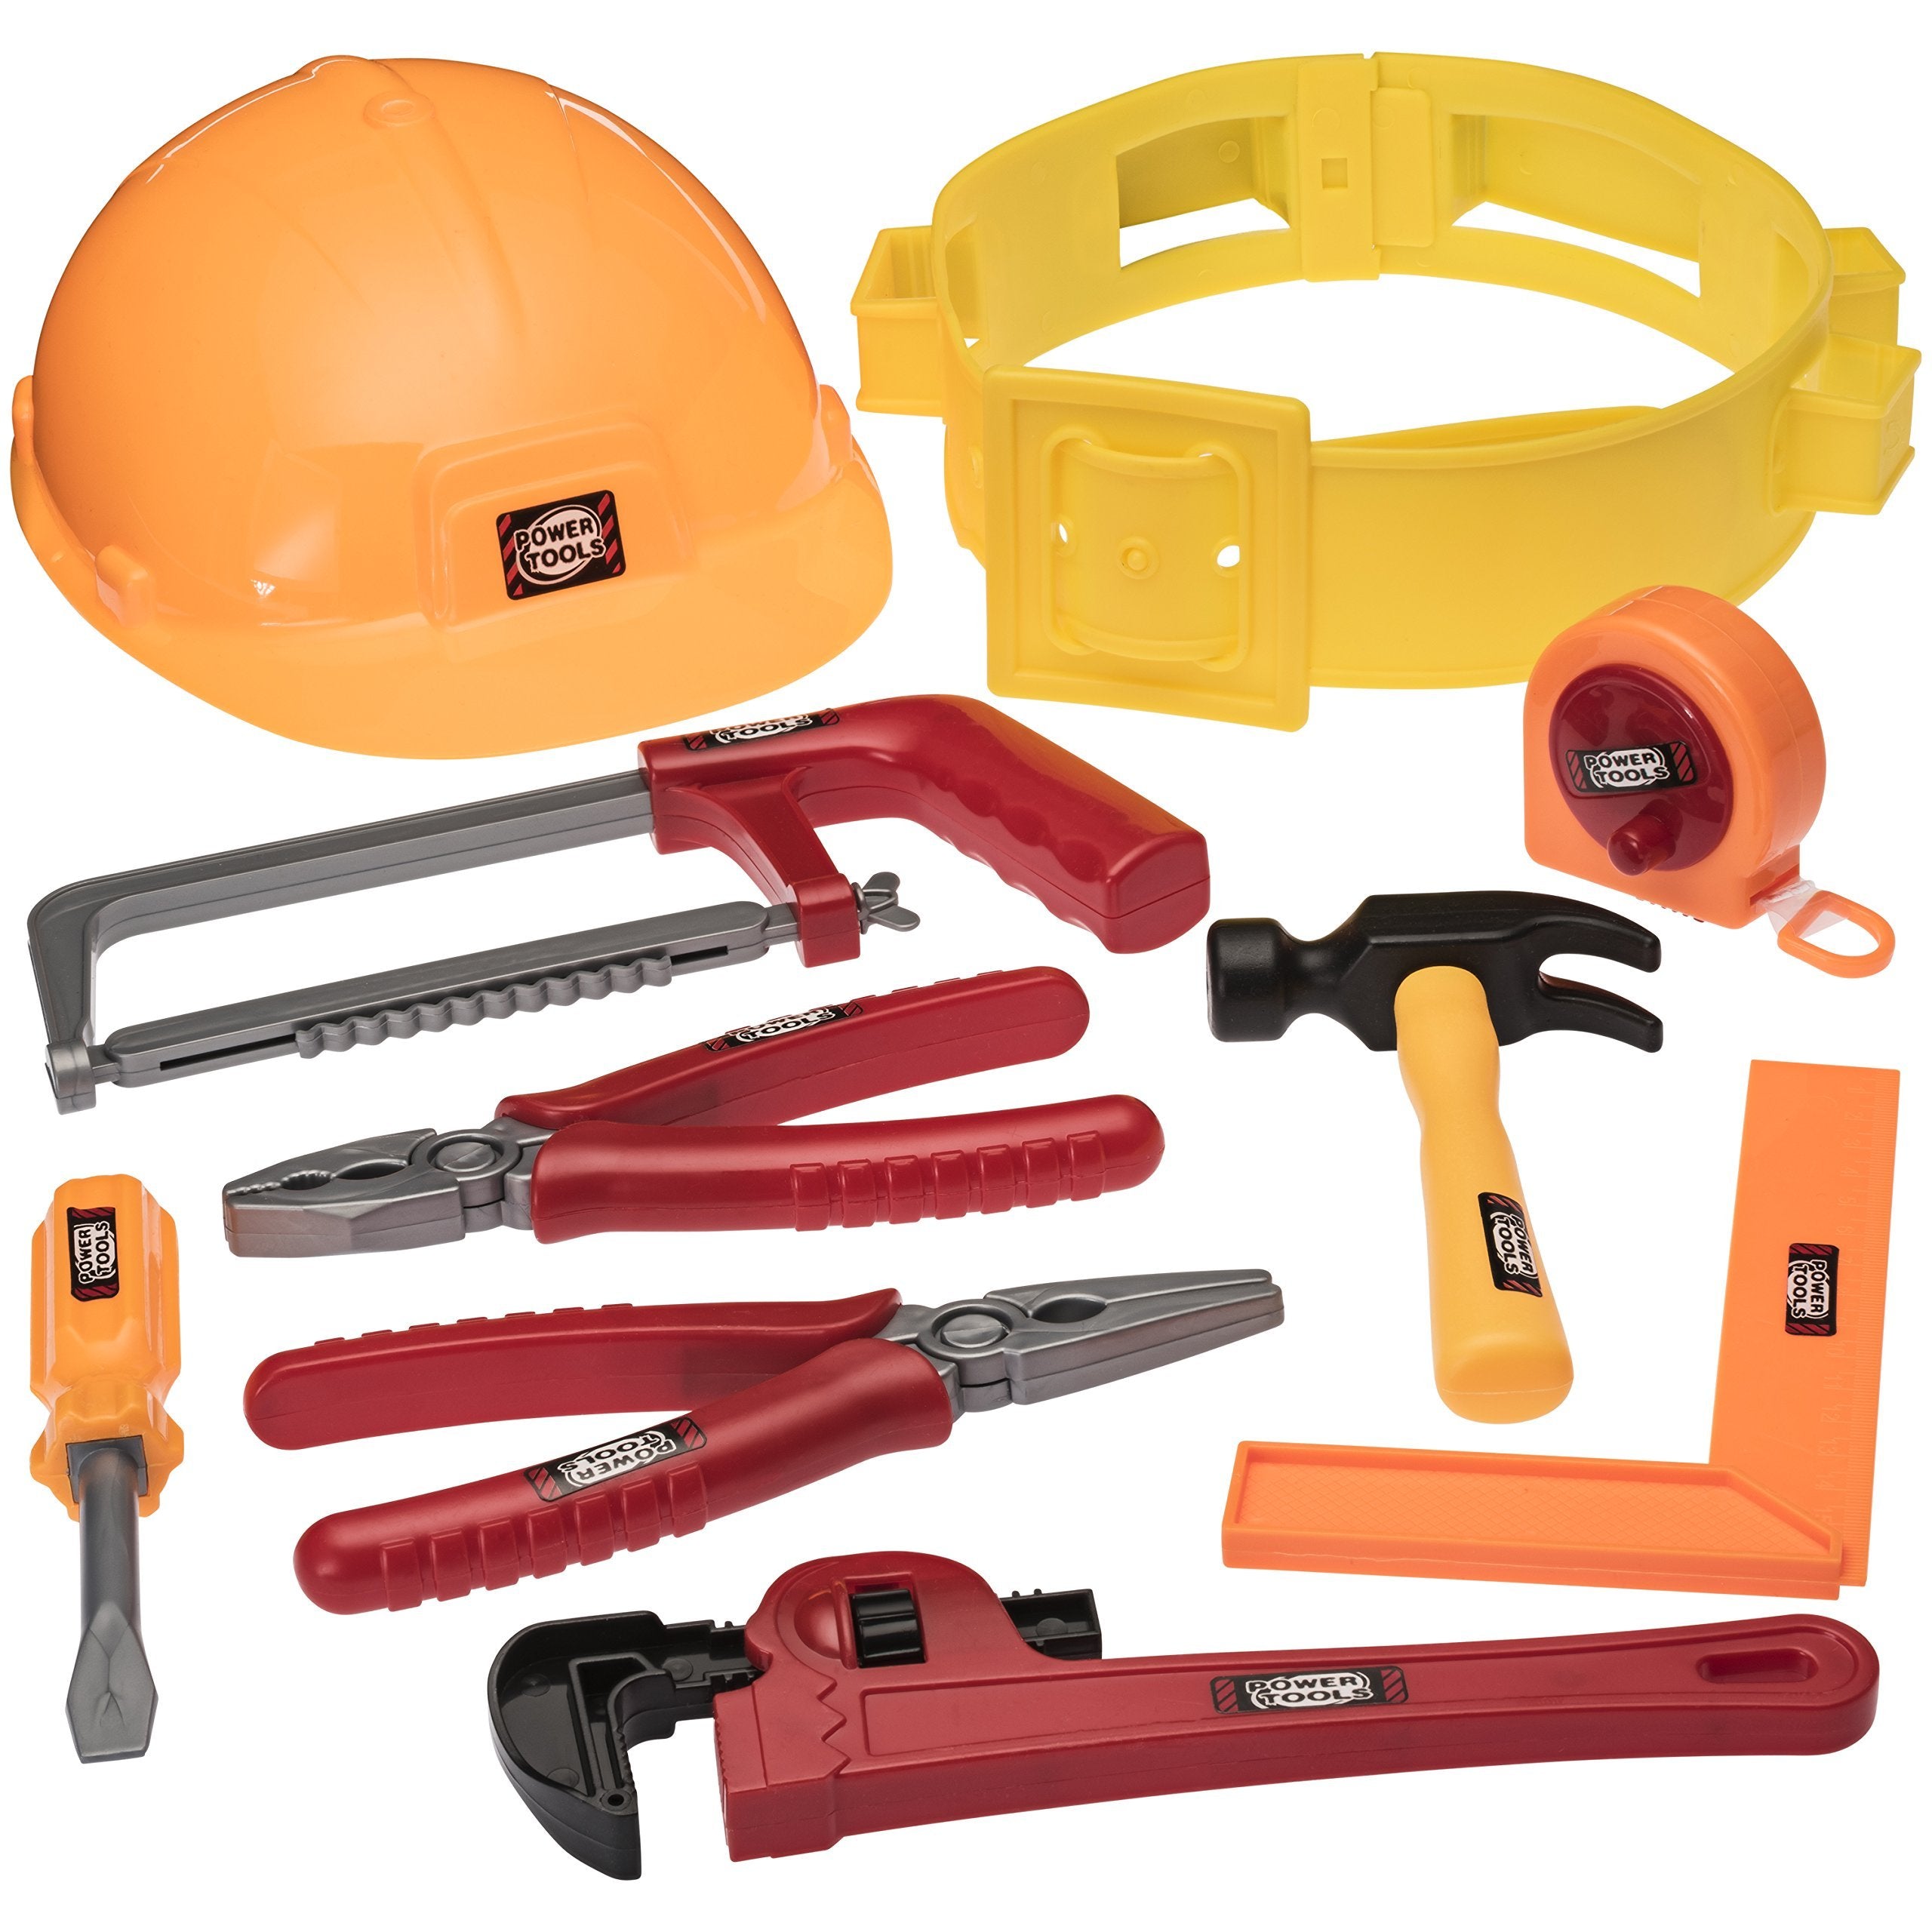 PREXTEX Little Handyman Kids' Toy Tool Belt Set | Kid Construction Toys | Great for Toddler, Boy and Kids Ages 1-3, Includes Hard Hat, Saw, Plier, Screwdriver, Ruler, Hammer, and Tape Measure